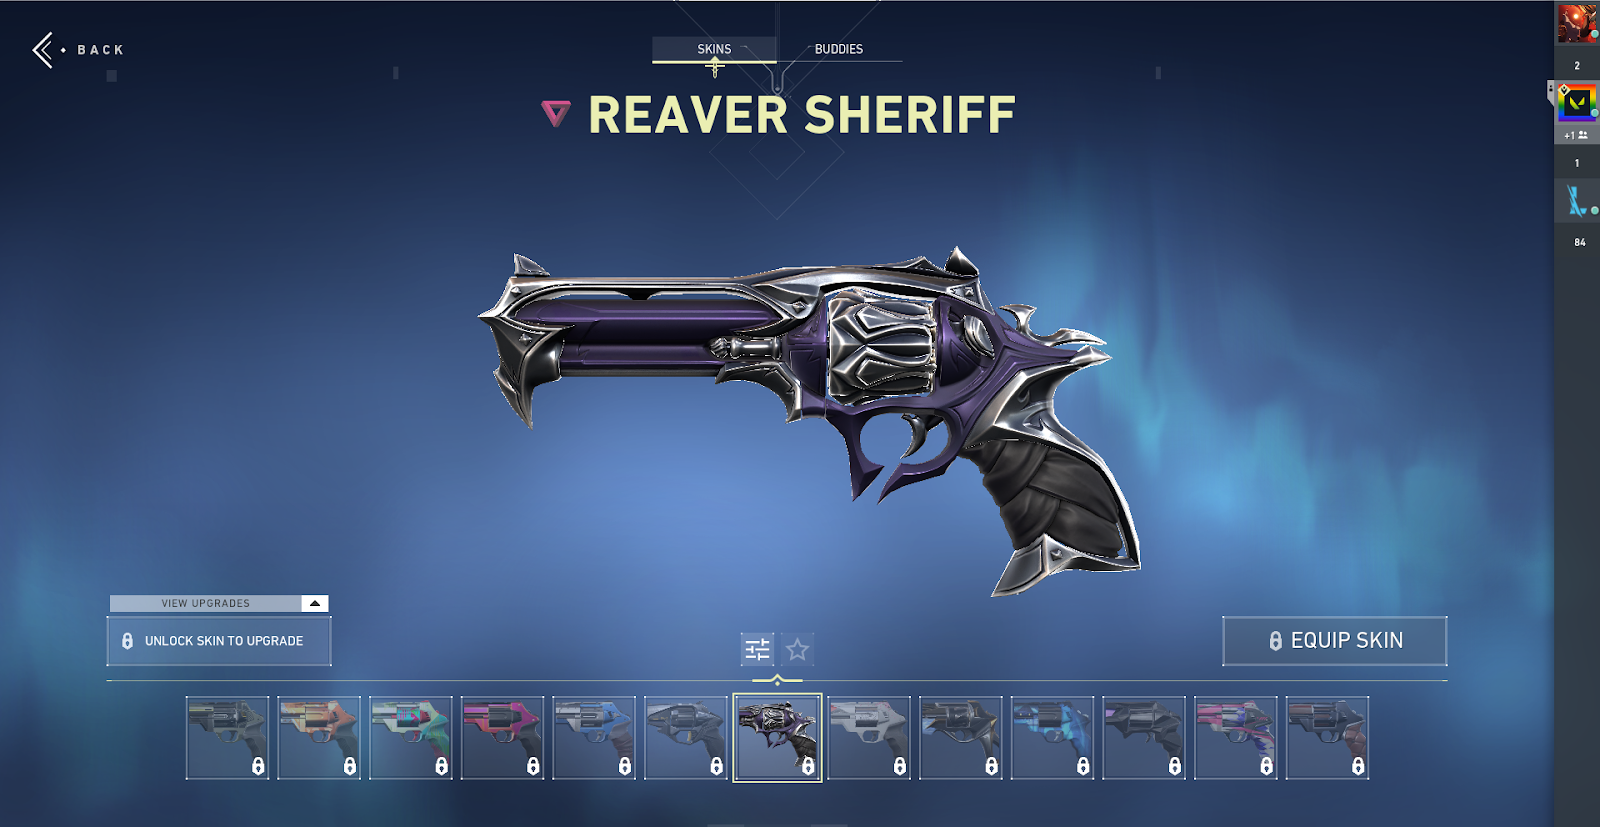 Valorant's Reaver Sheriff skin features an edgy black and purple gothic design